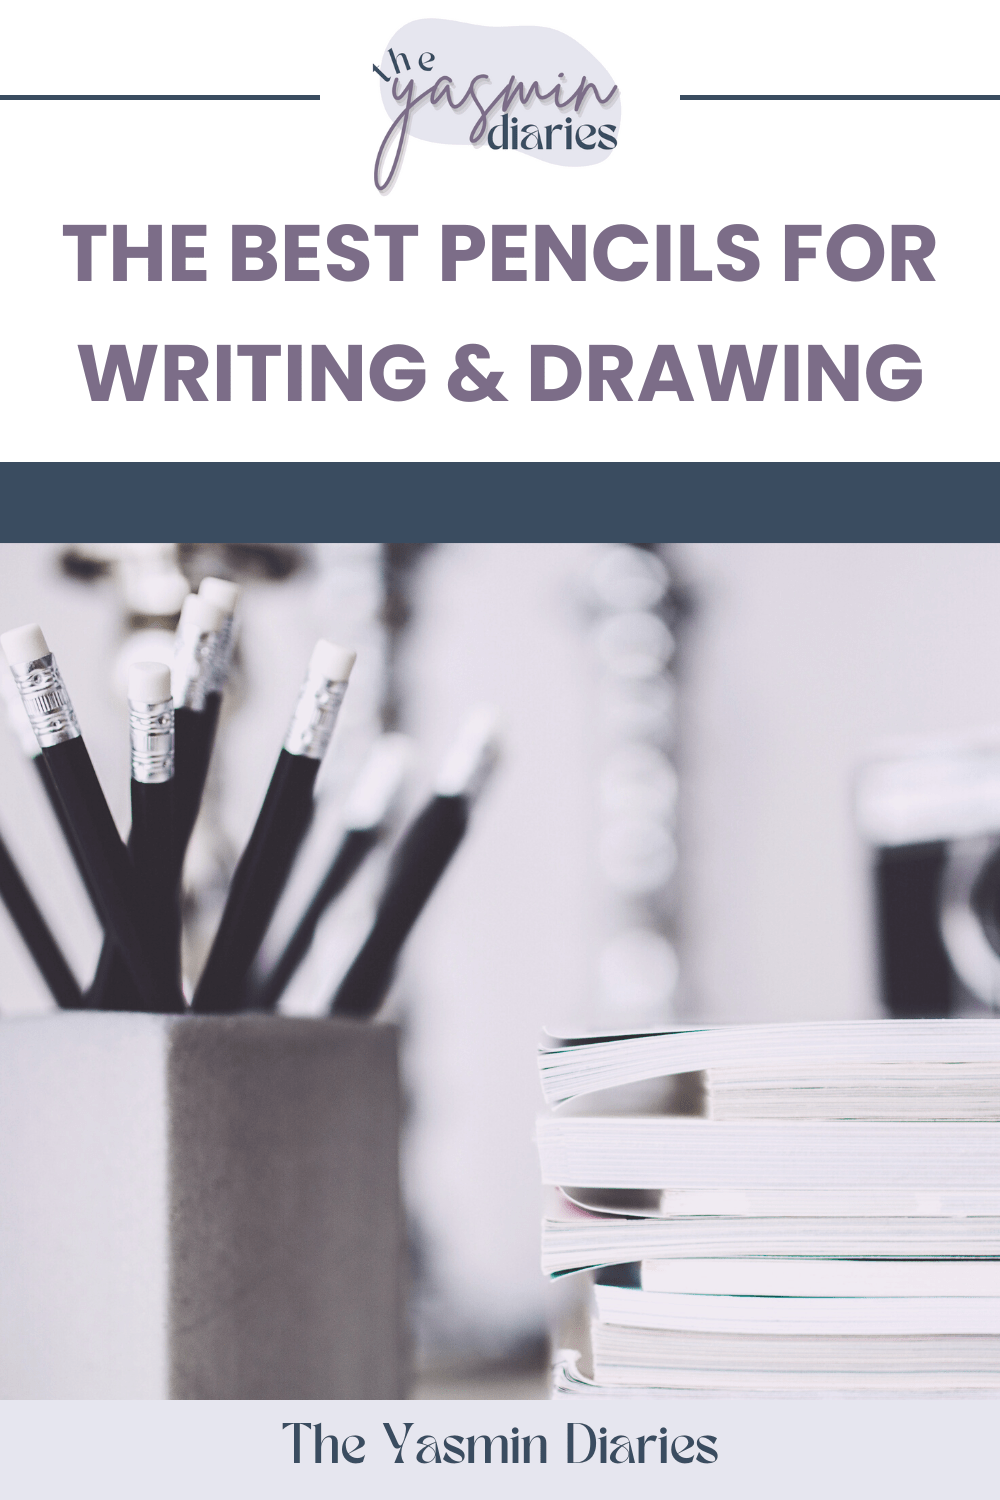 The Best Pencils for Writing & Drawing